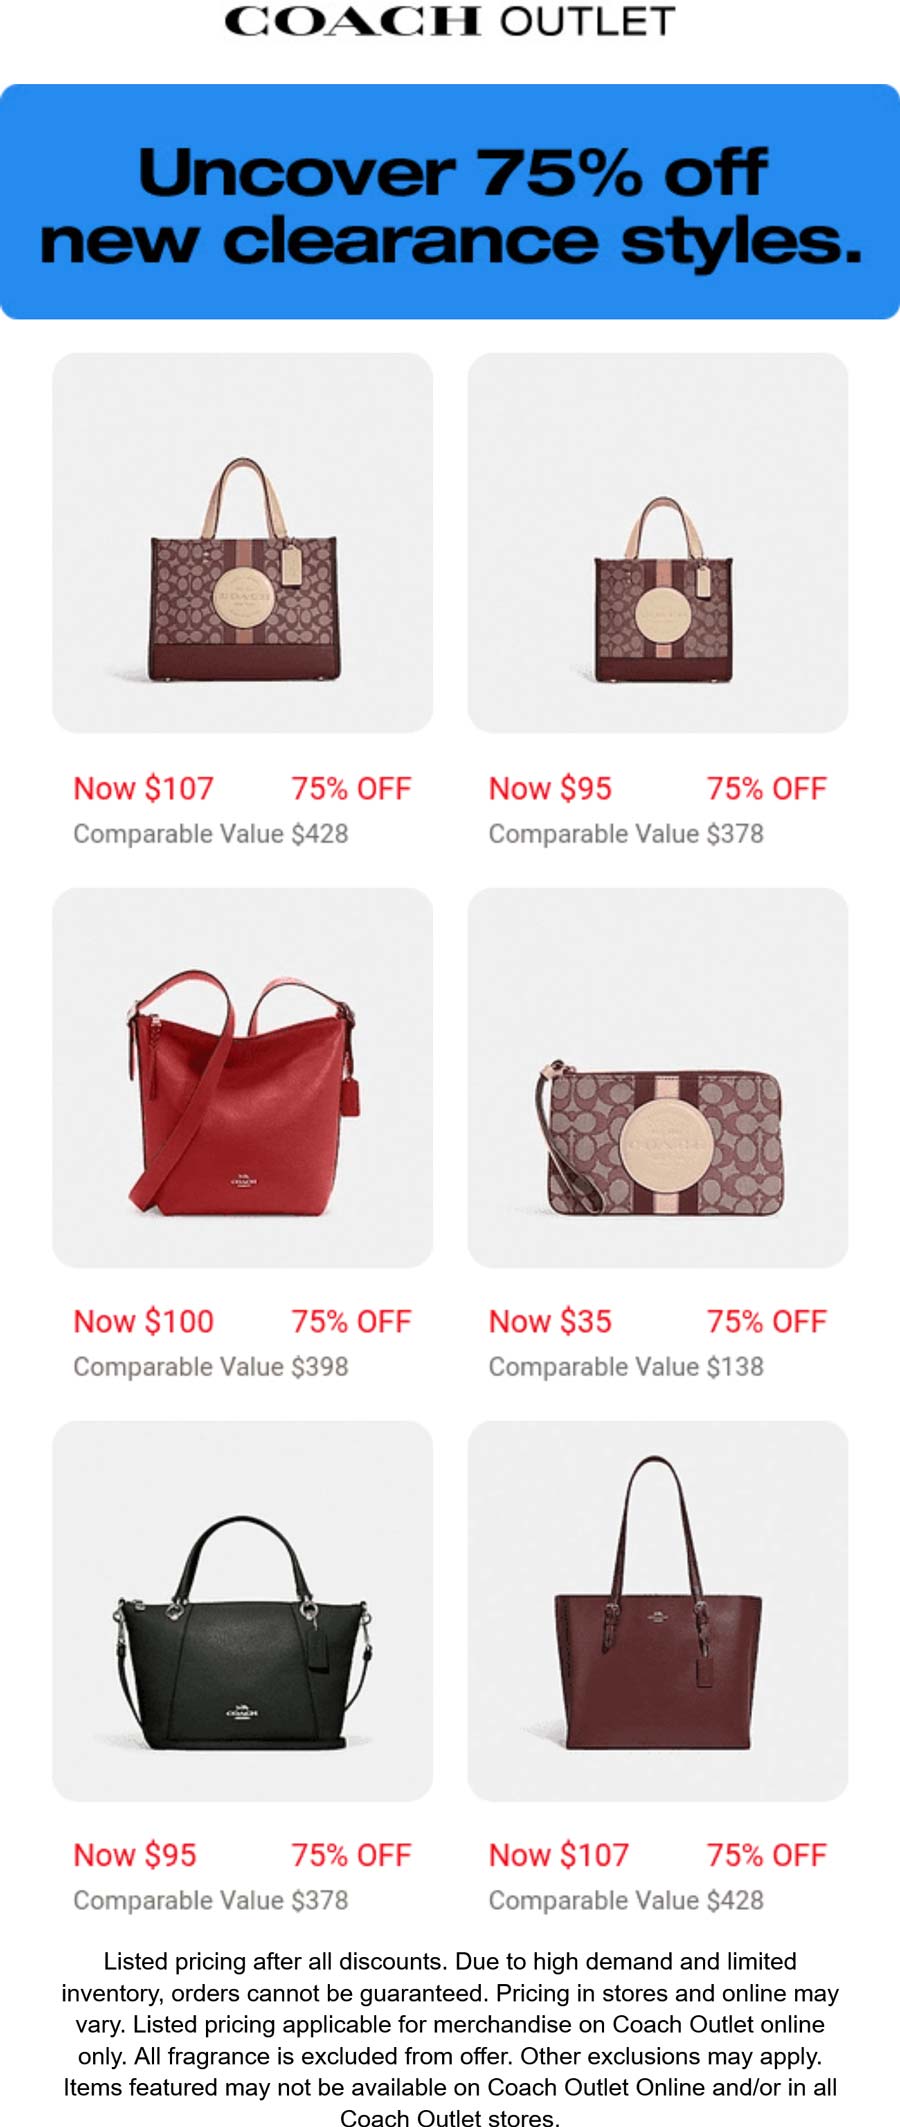 Coach Outlet stores Coupon  75% off clearance styles at Coach Outlet #coachoutlet 